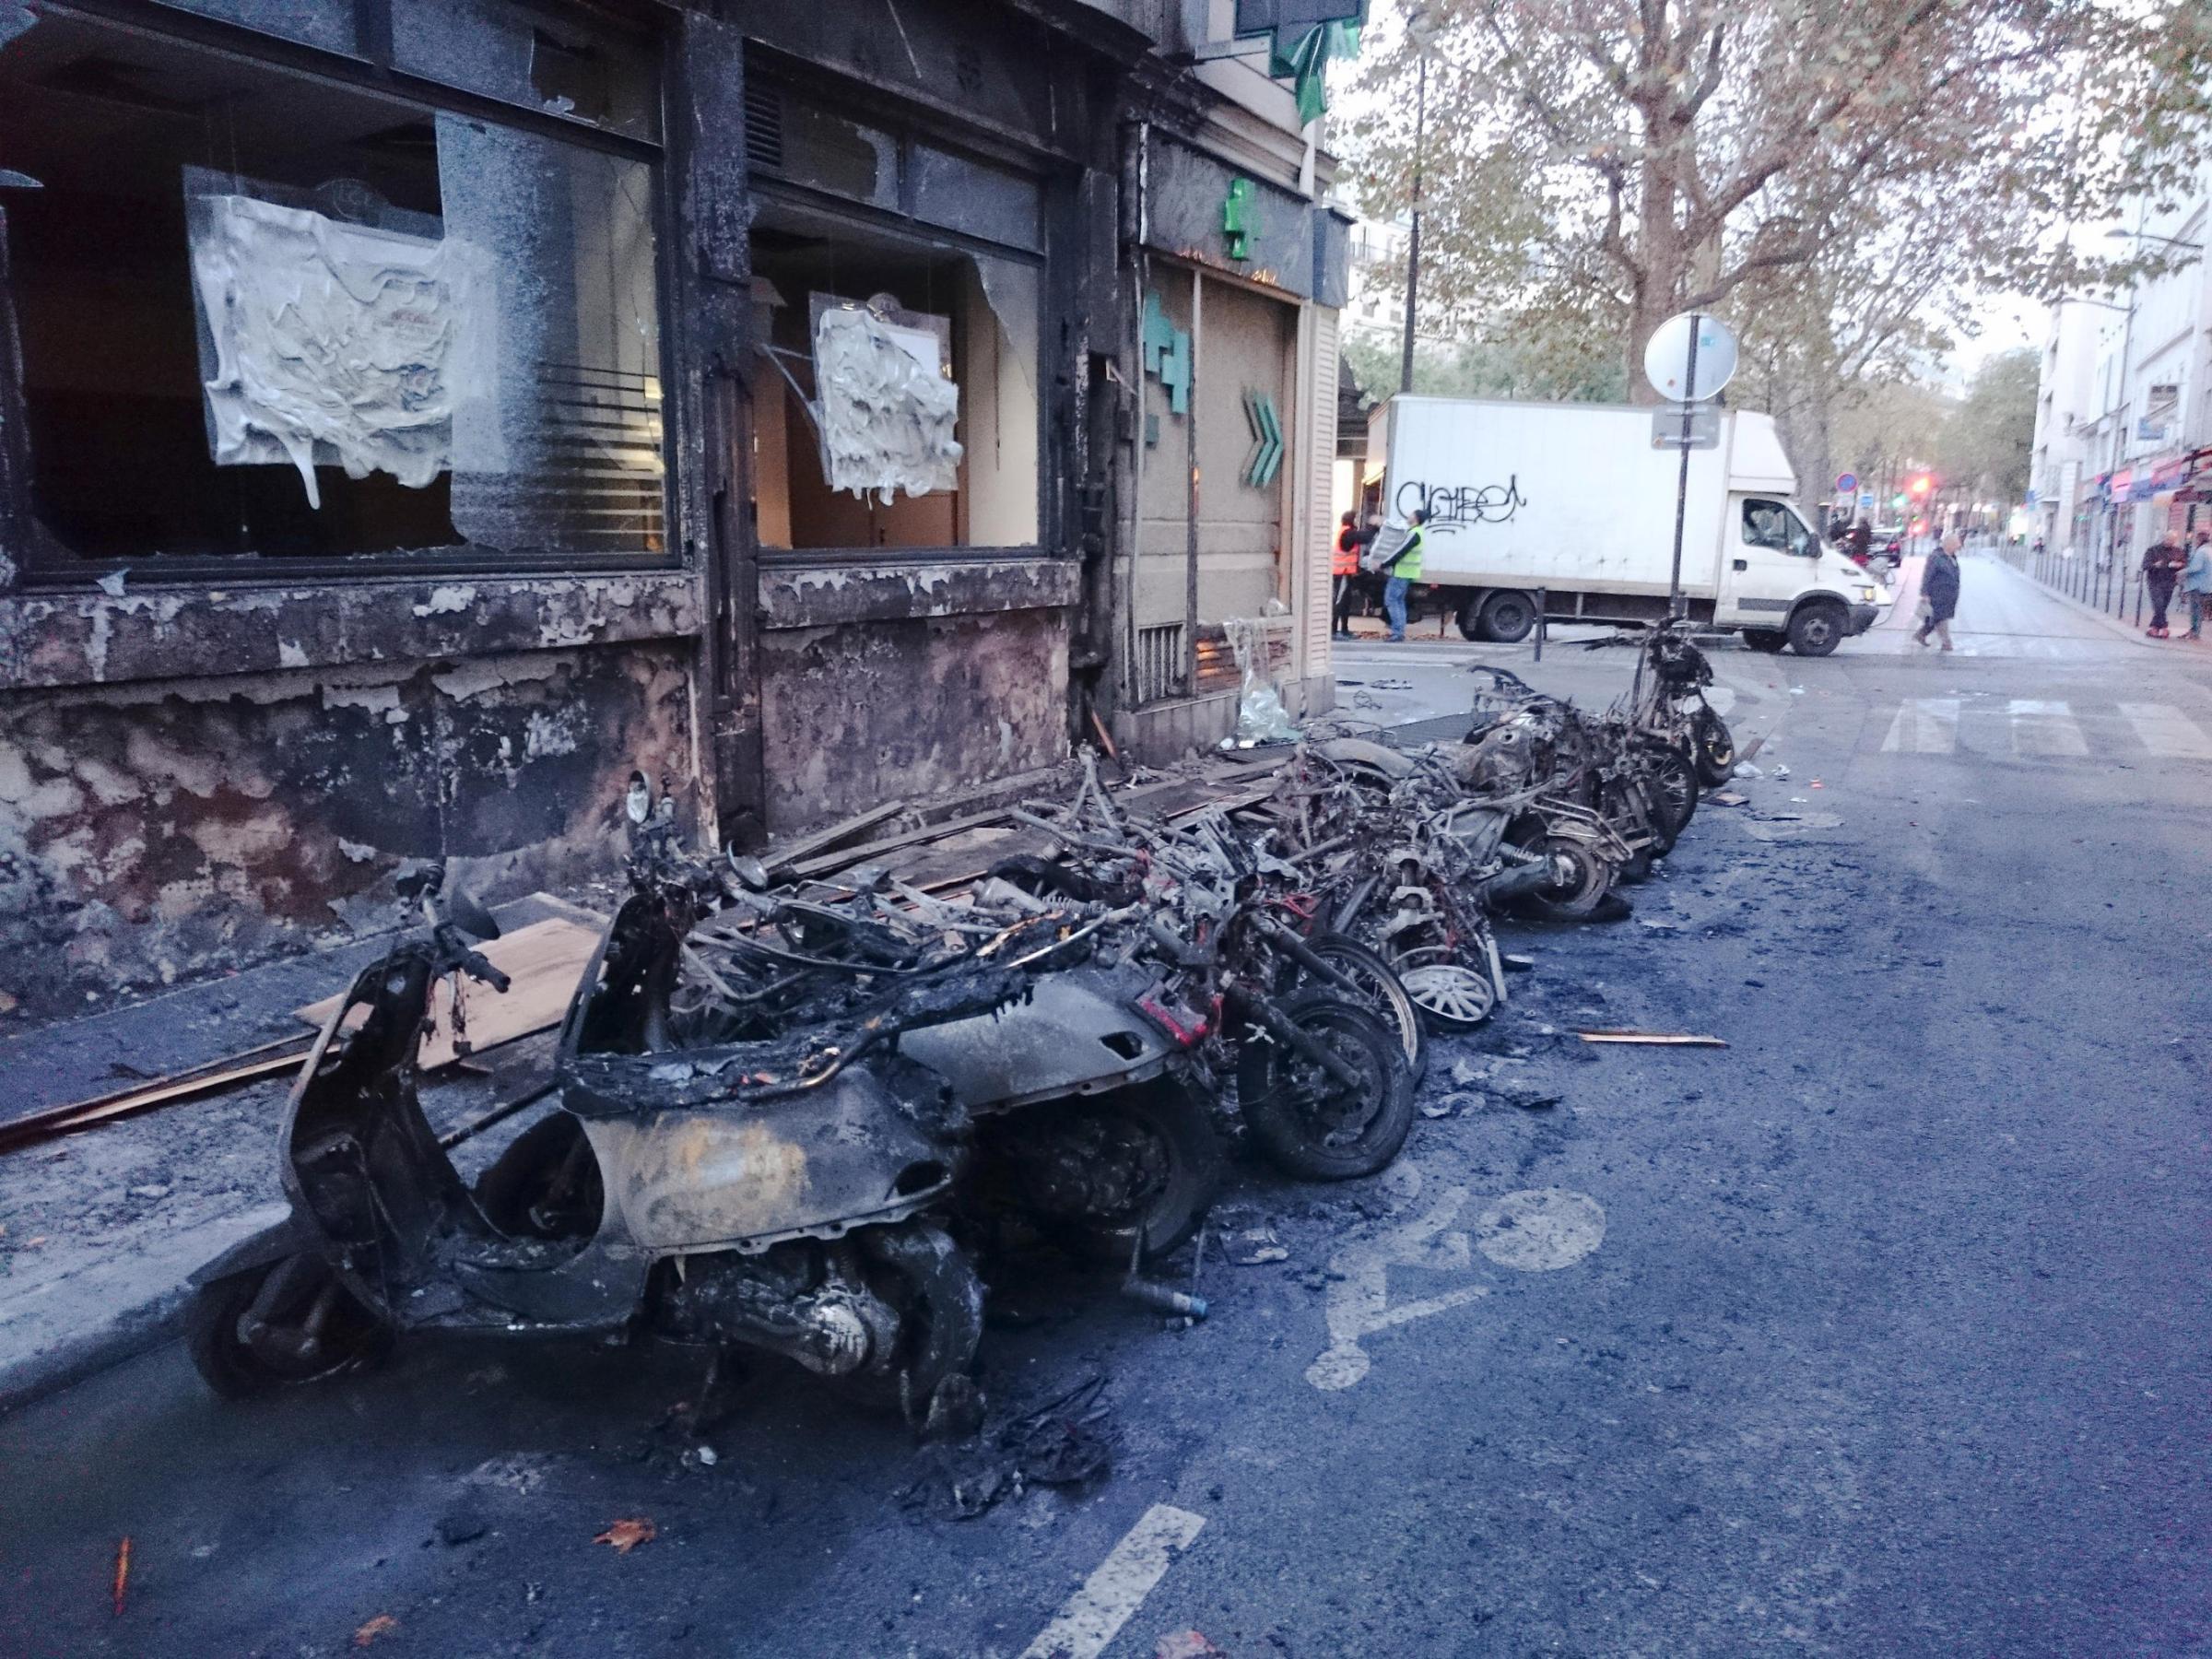 Dozens of burnt motorbikes and bikes are pictured on the corner of Albert Thomas Lancry streets, in the 10th arrondissement of Paris, on November 14, 2015, few hours after a series of terror attacks that occurred across the city.  ©MAXIME JOUY/NEWZULU/Al